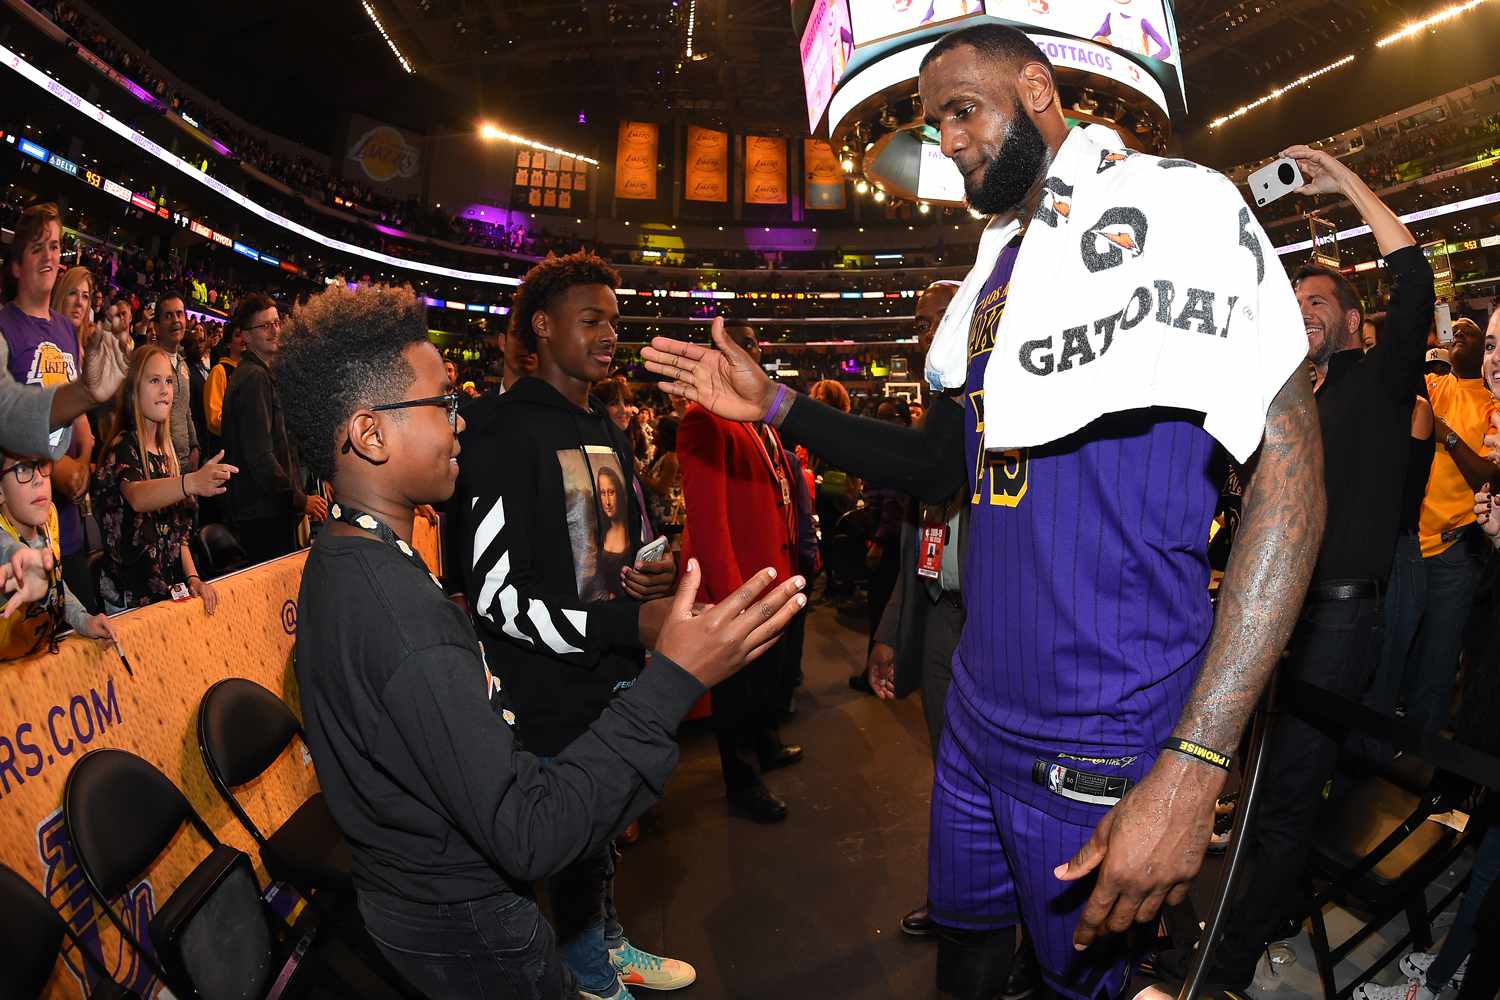 LeBron James #23 of the Los Angeles Lakers is seen shaking hands with his sons Bryce Maximus James and LeBron James Jr. after winning the game against the Utah Jazz on November 23, 2018